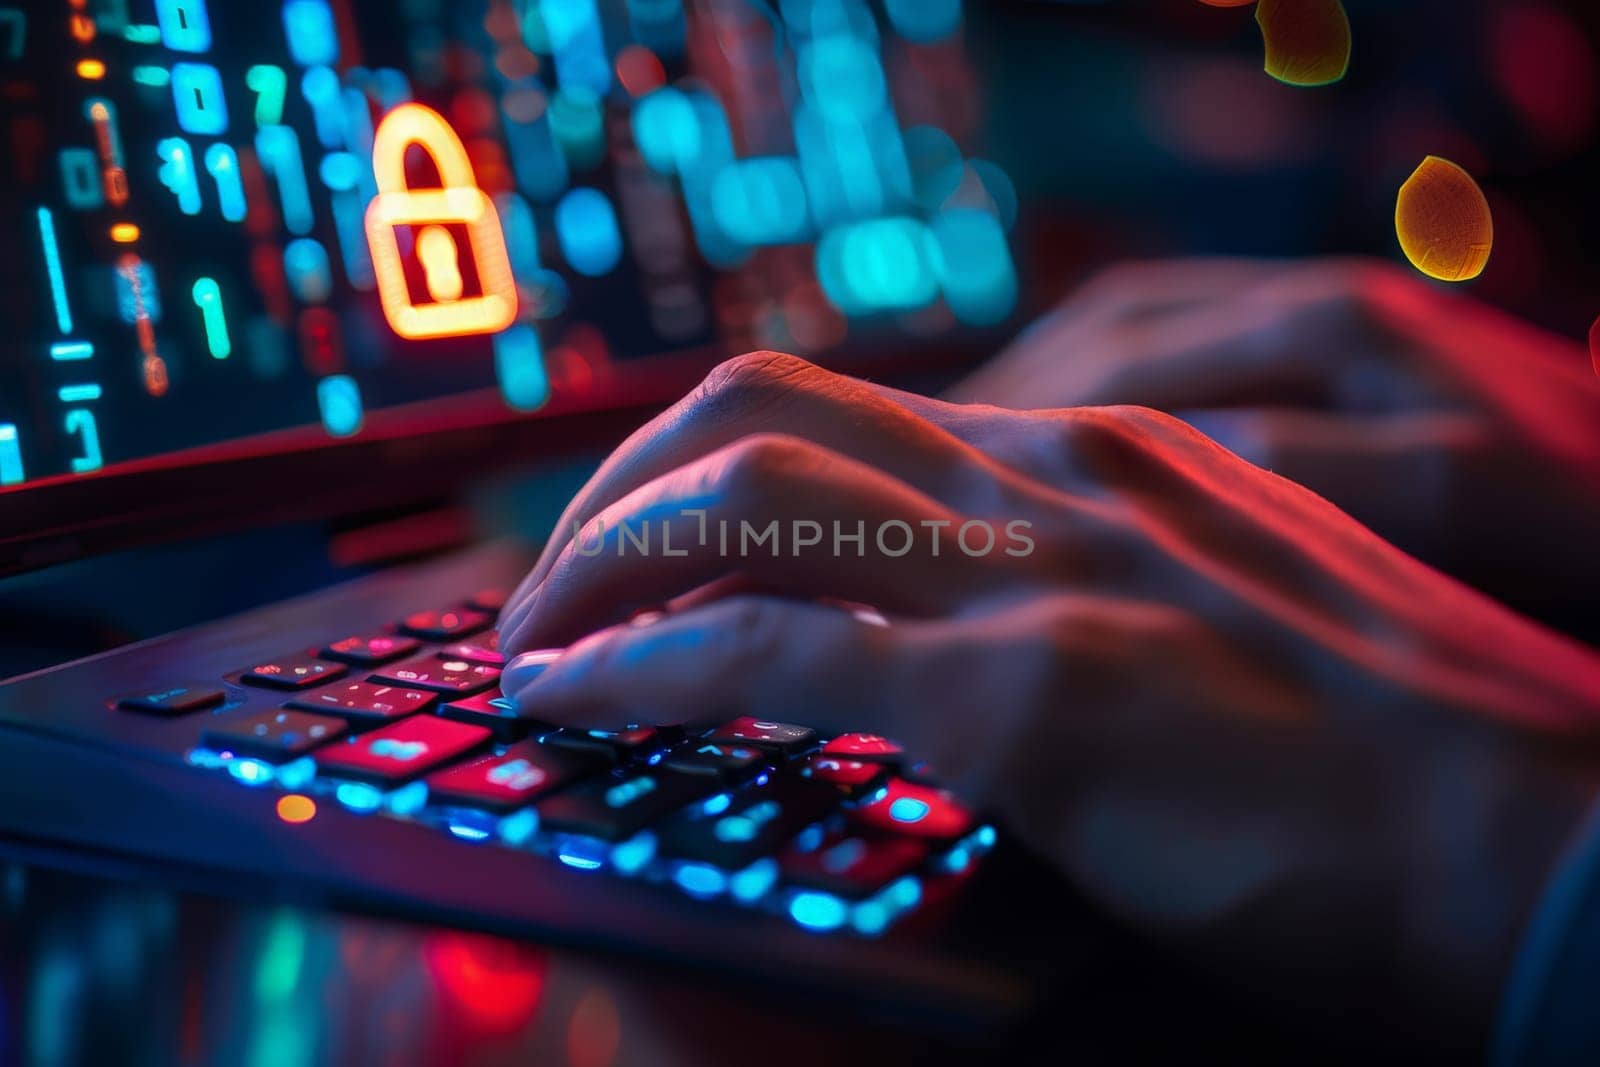 A close-up shot capturing hands typing on a laptop keyboard with precision and focus.